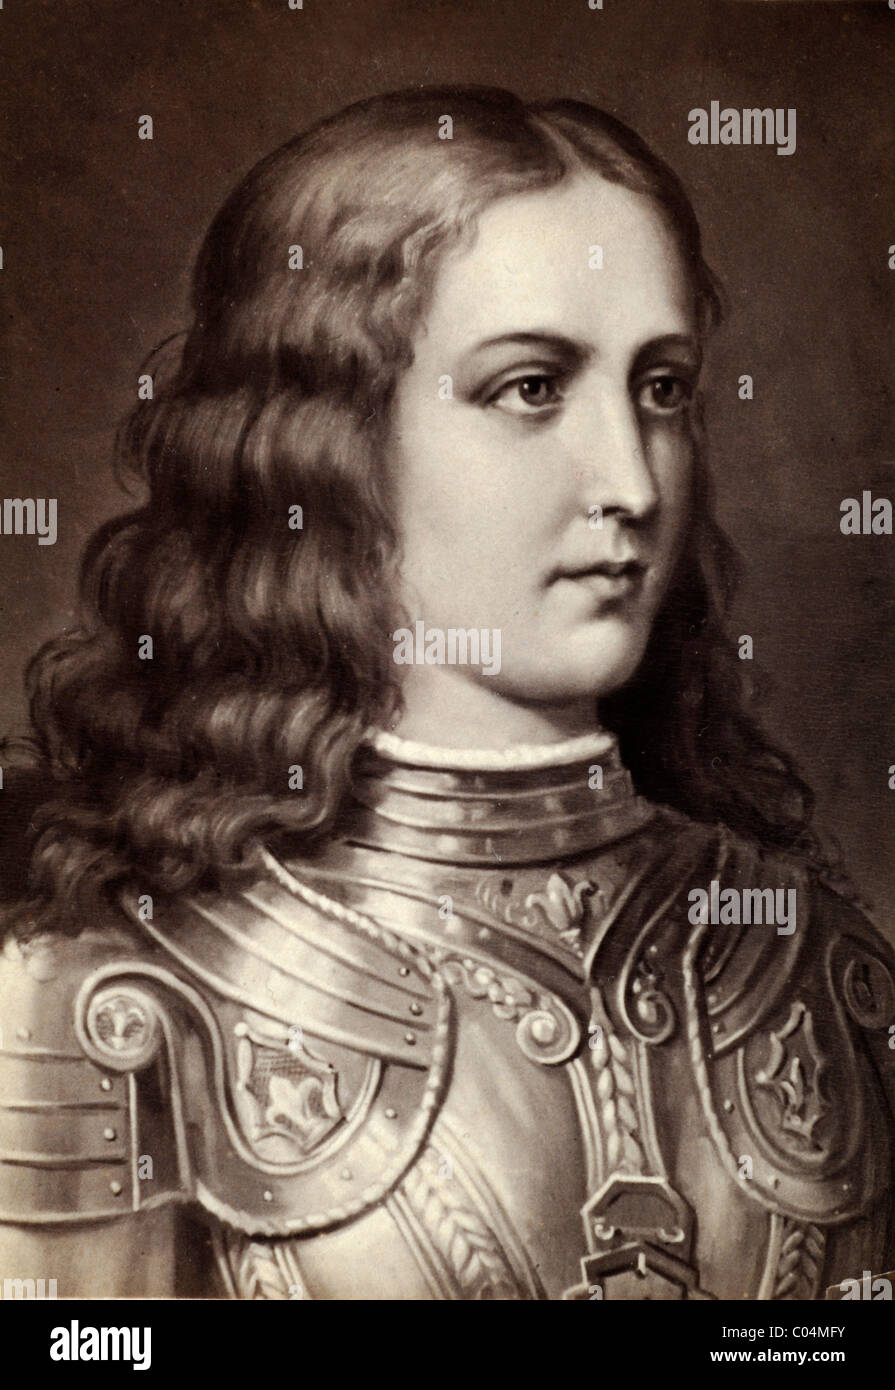 Joan of Arc (c1412-1431) or Jeanne d'Arc. French national heroine. Portrait Wearing Military Armour or Body Armour c19th Albumen Print of Earlier Painting. Stock Photo